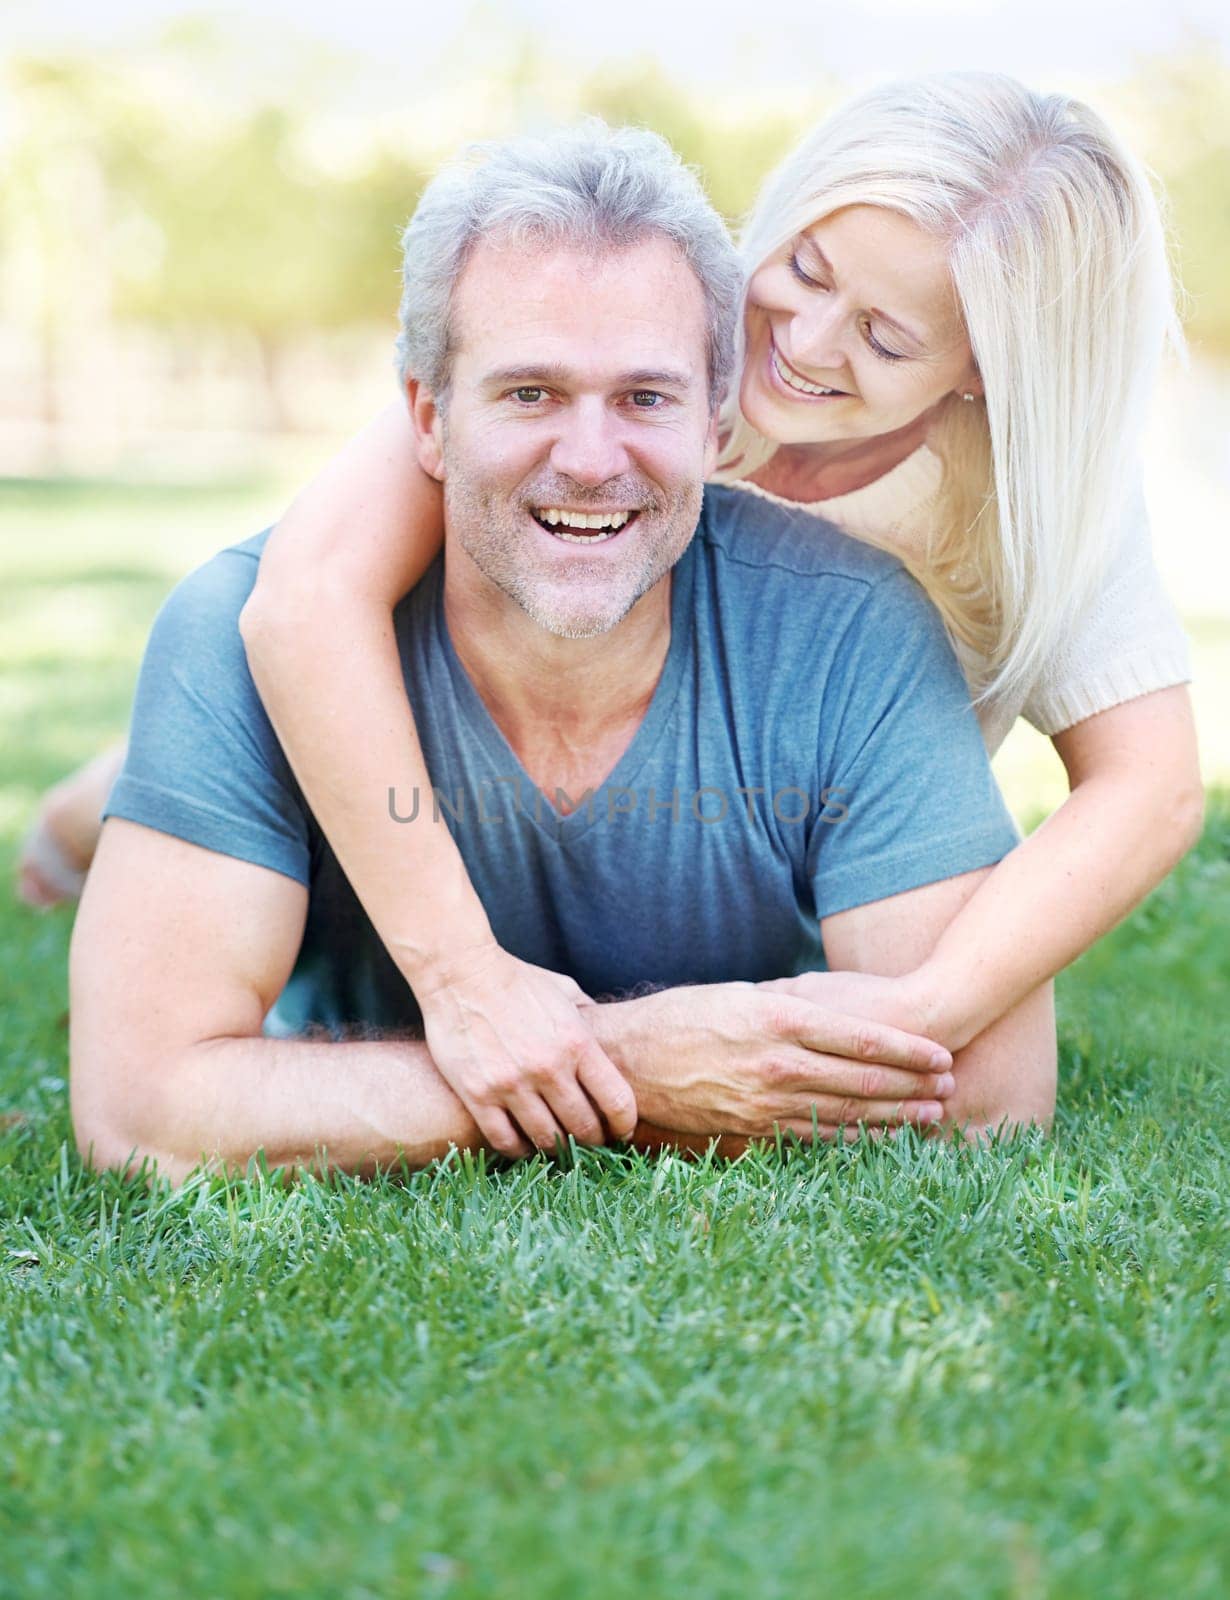 Happy, park and portrait of senior couple for bonding, relationship and commitment outdoors on grass. Love, retirement and mature man and woman embrace for romance, relax and marriage in nature.